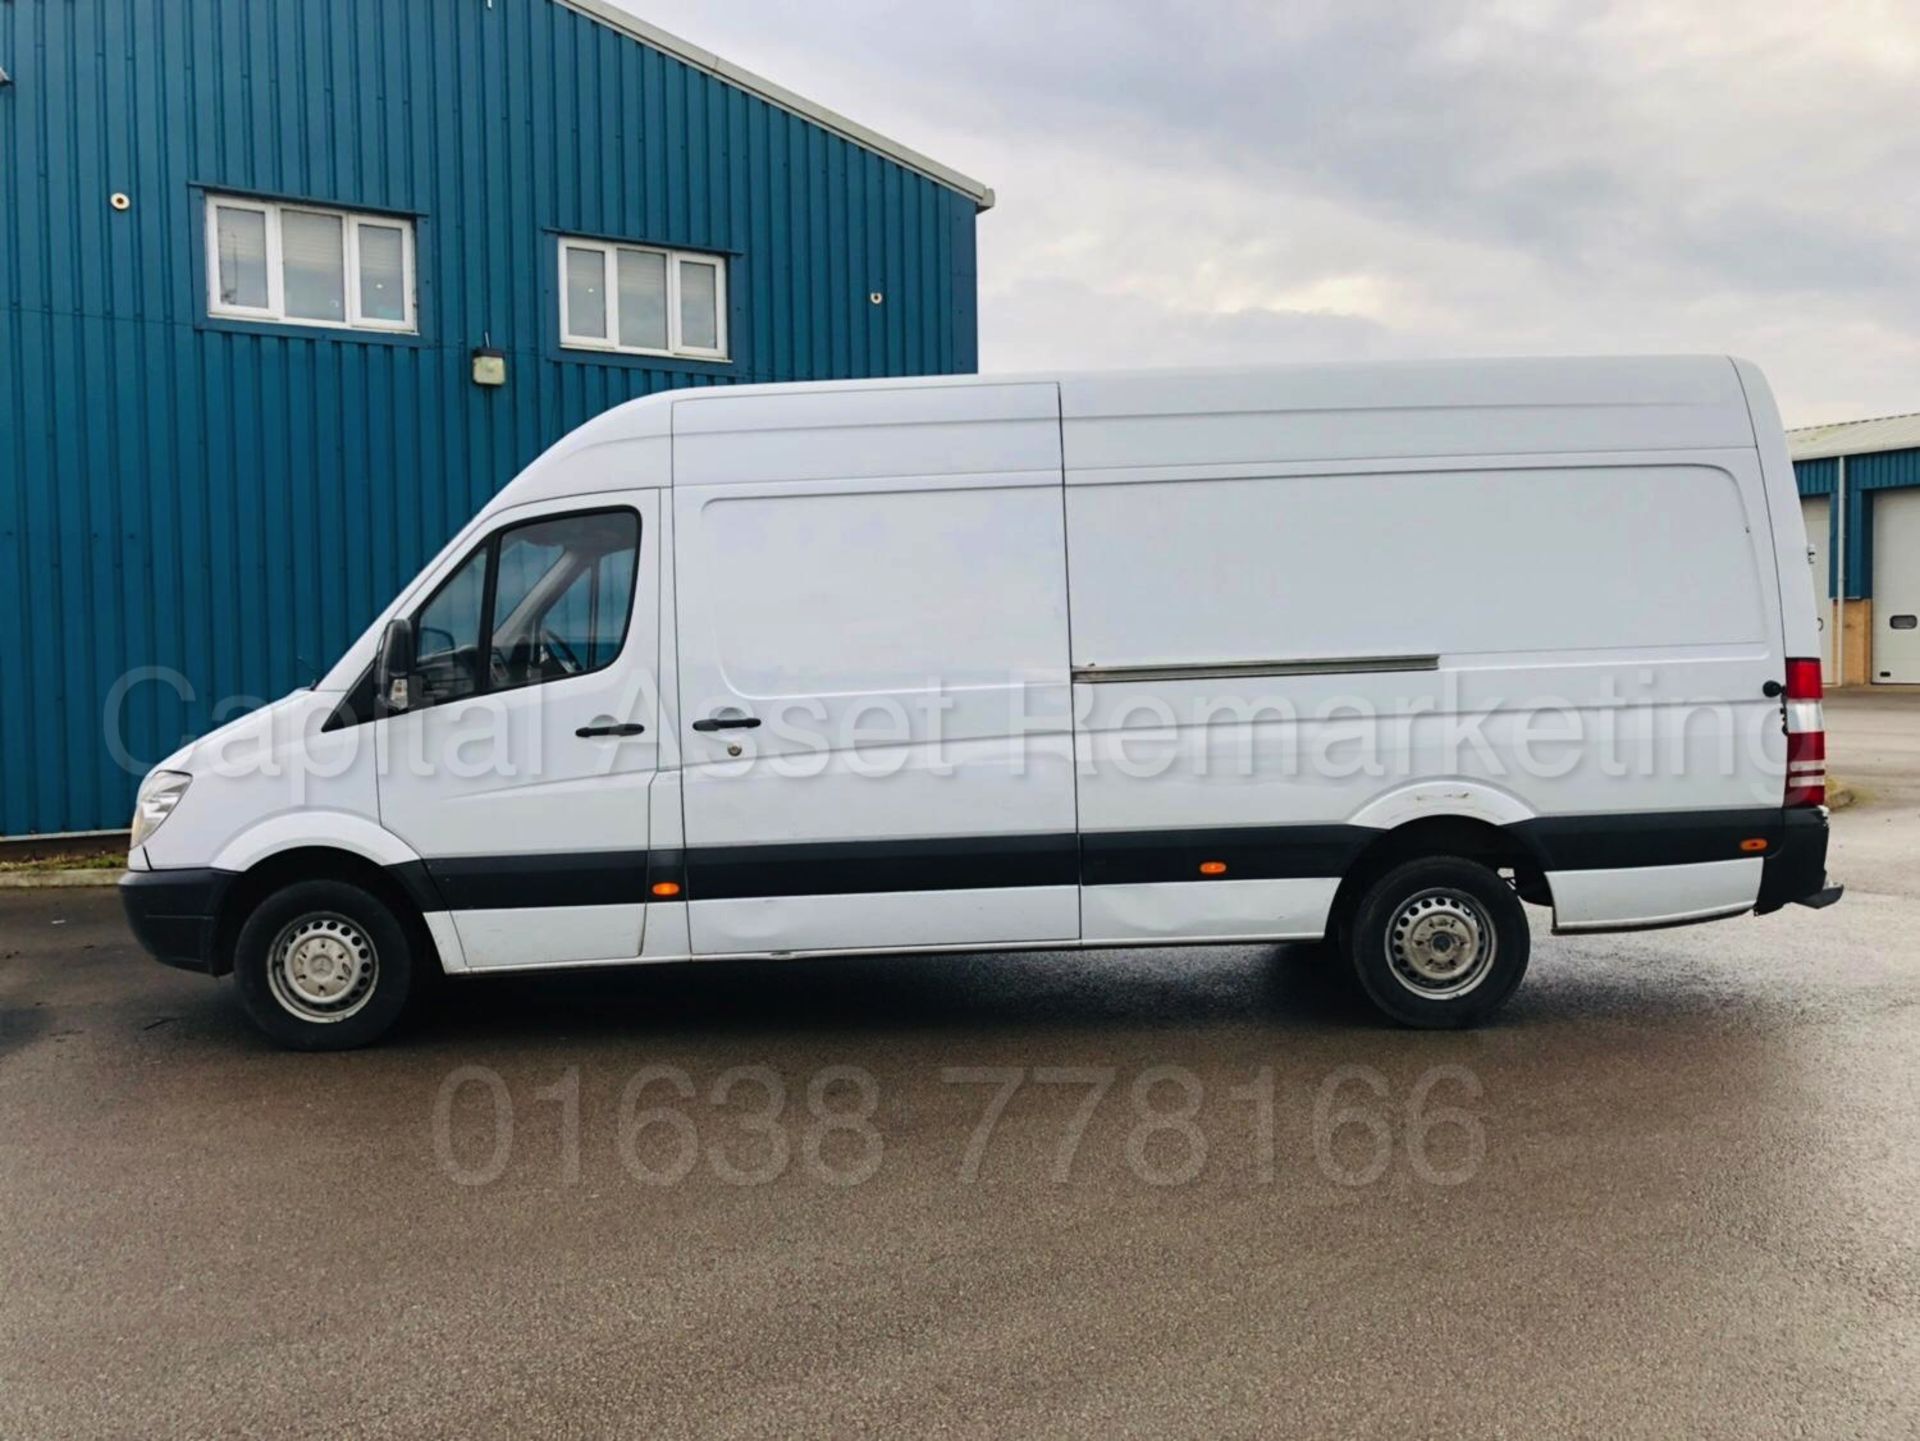 MERCEDES-BENZ SPRINTER 313 CDI *LWB HI-ROOF* (2014 MODEL) '130 BHP - 6 SPEED' (1 OWNER FROM NEW) - Image 8 of 32